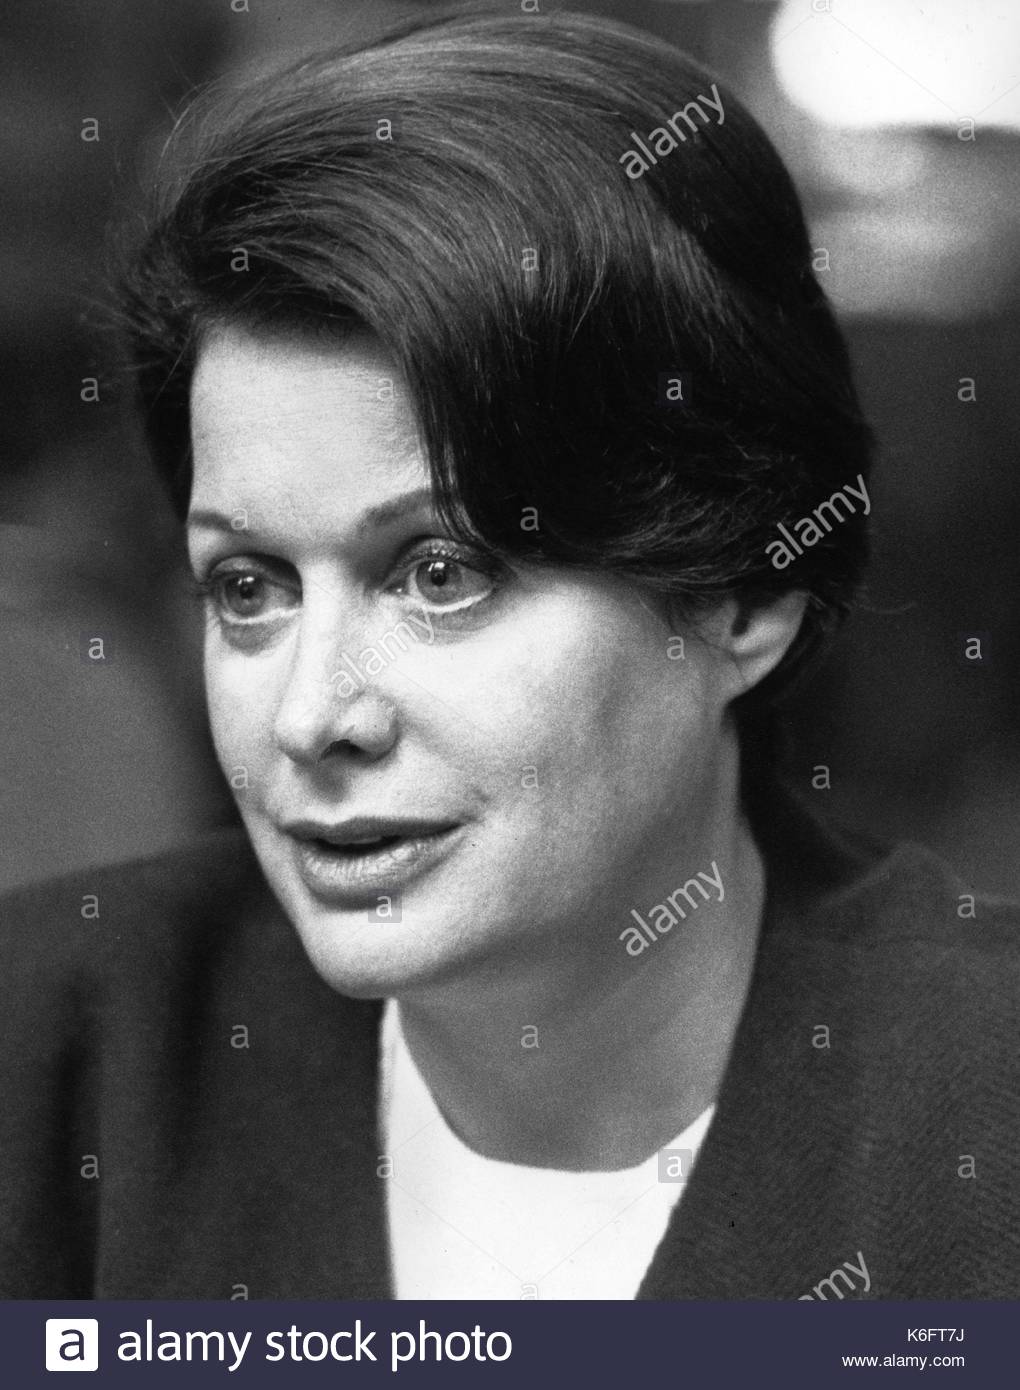 Barbara Kogan in October 1990. On an October day in 1990, a Stock Photo ...